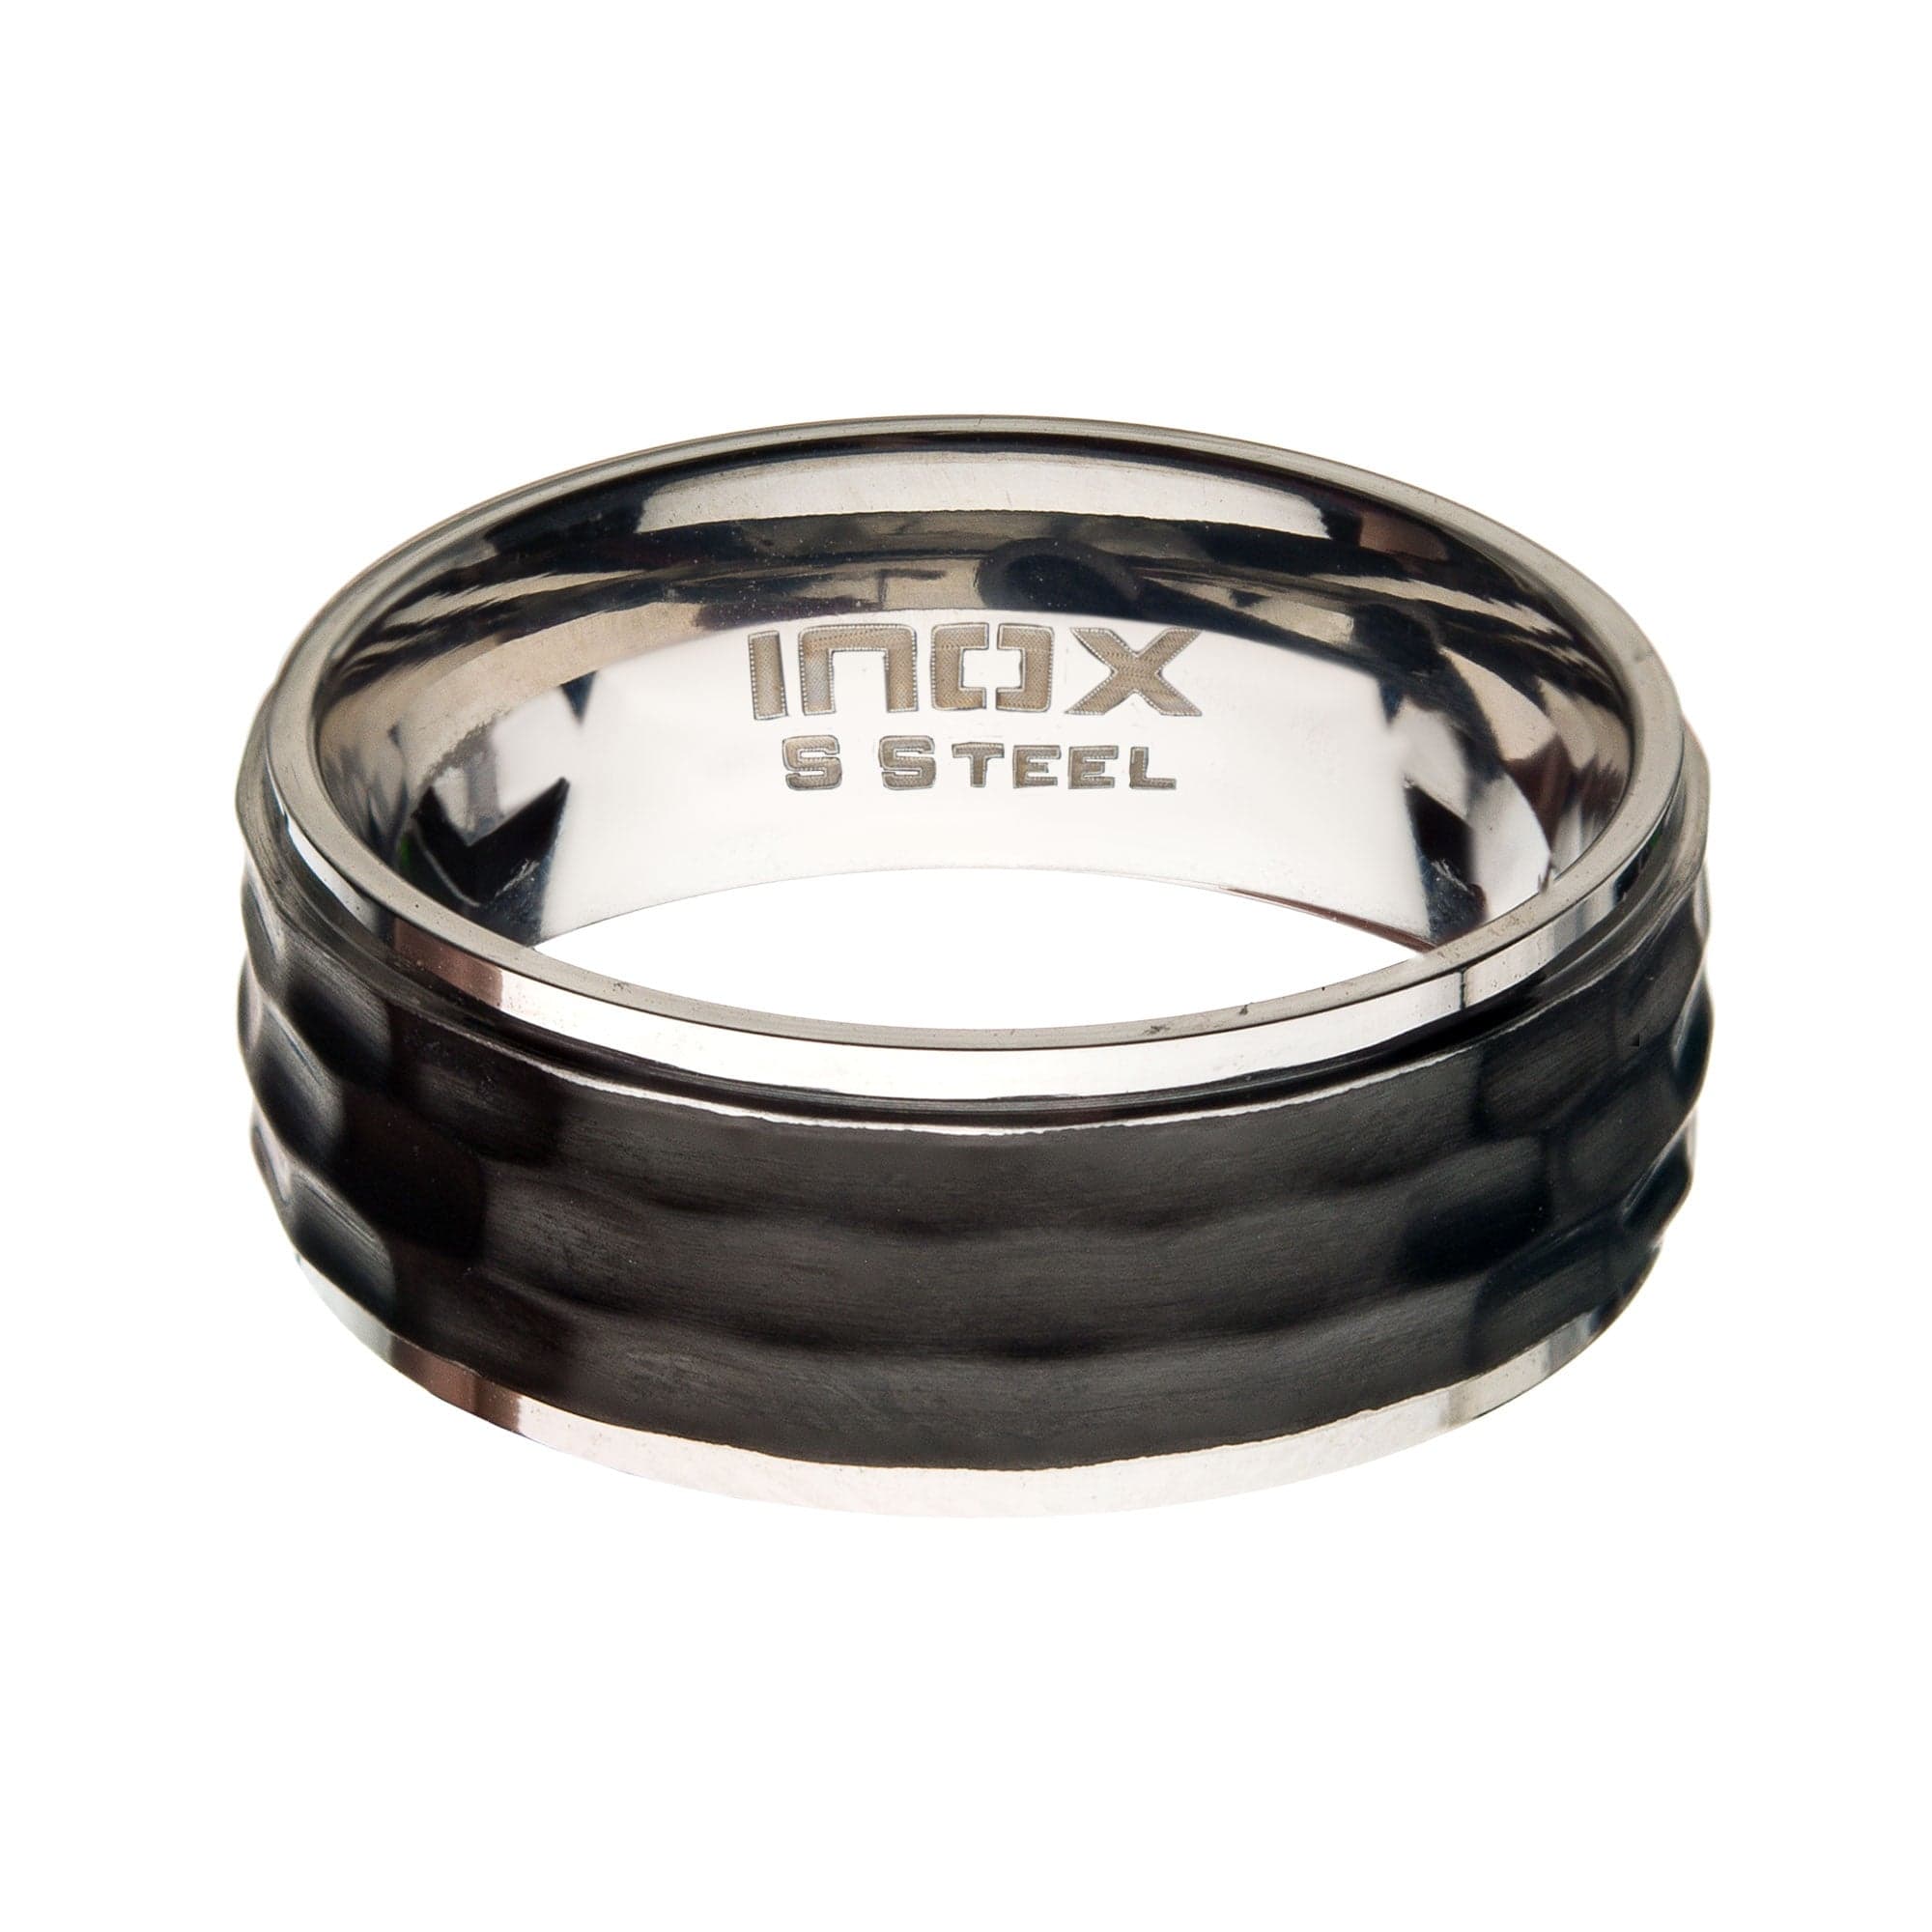 INOX JEWELRY Rings Black and Silver Tone Stainless Steel Matte Finish Hammered Design Inlaid Band Ring